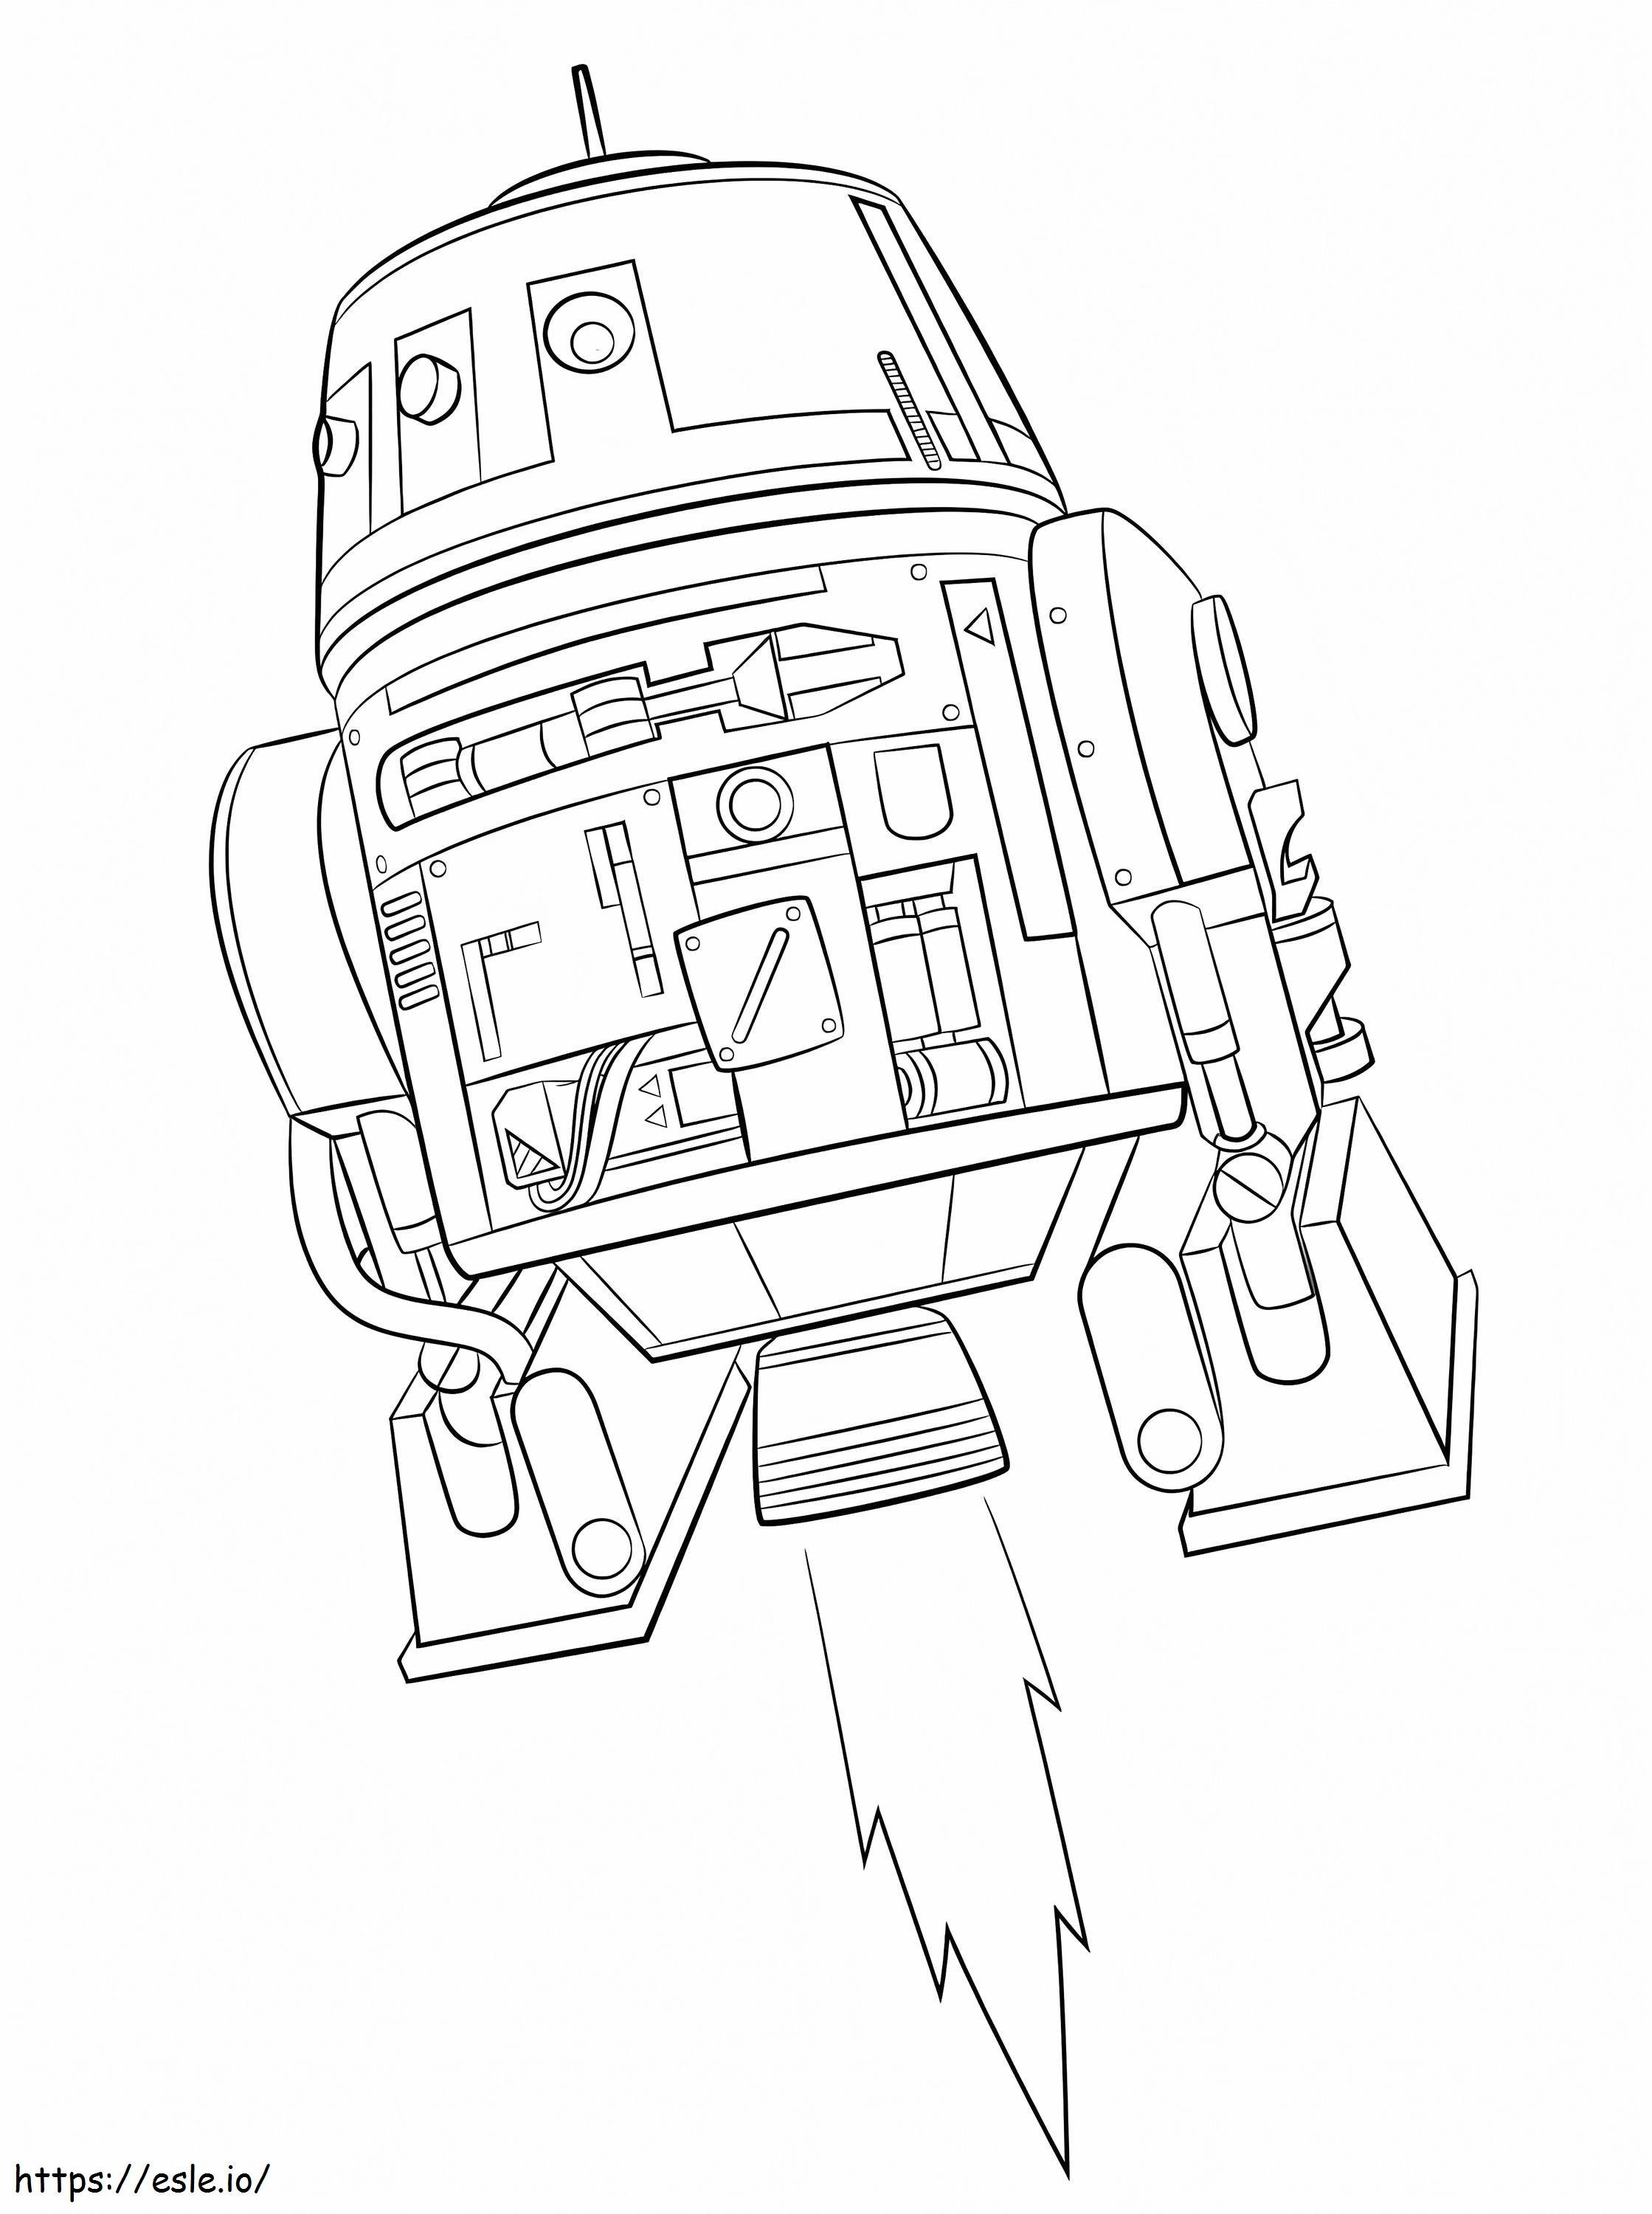 Chopper The Star Wars coloring page